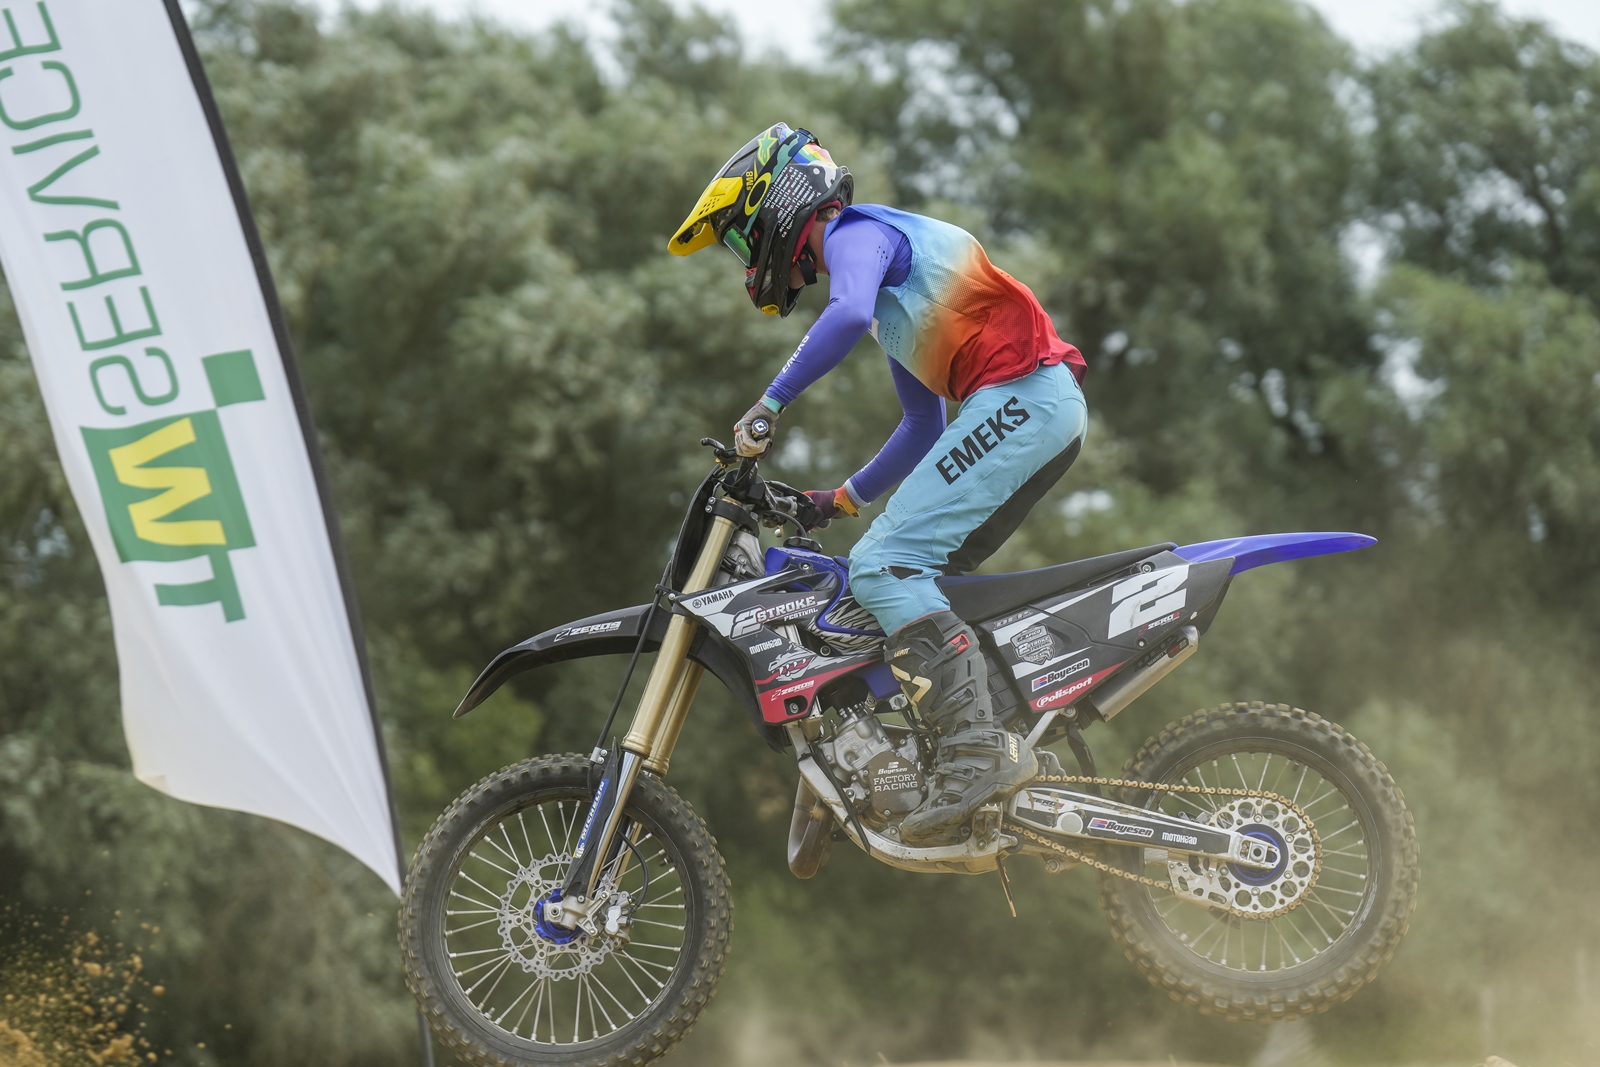 Thanet-Waste-TW-Services-and-2Stroke-Festival-rider-Freddie-Wille